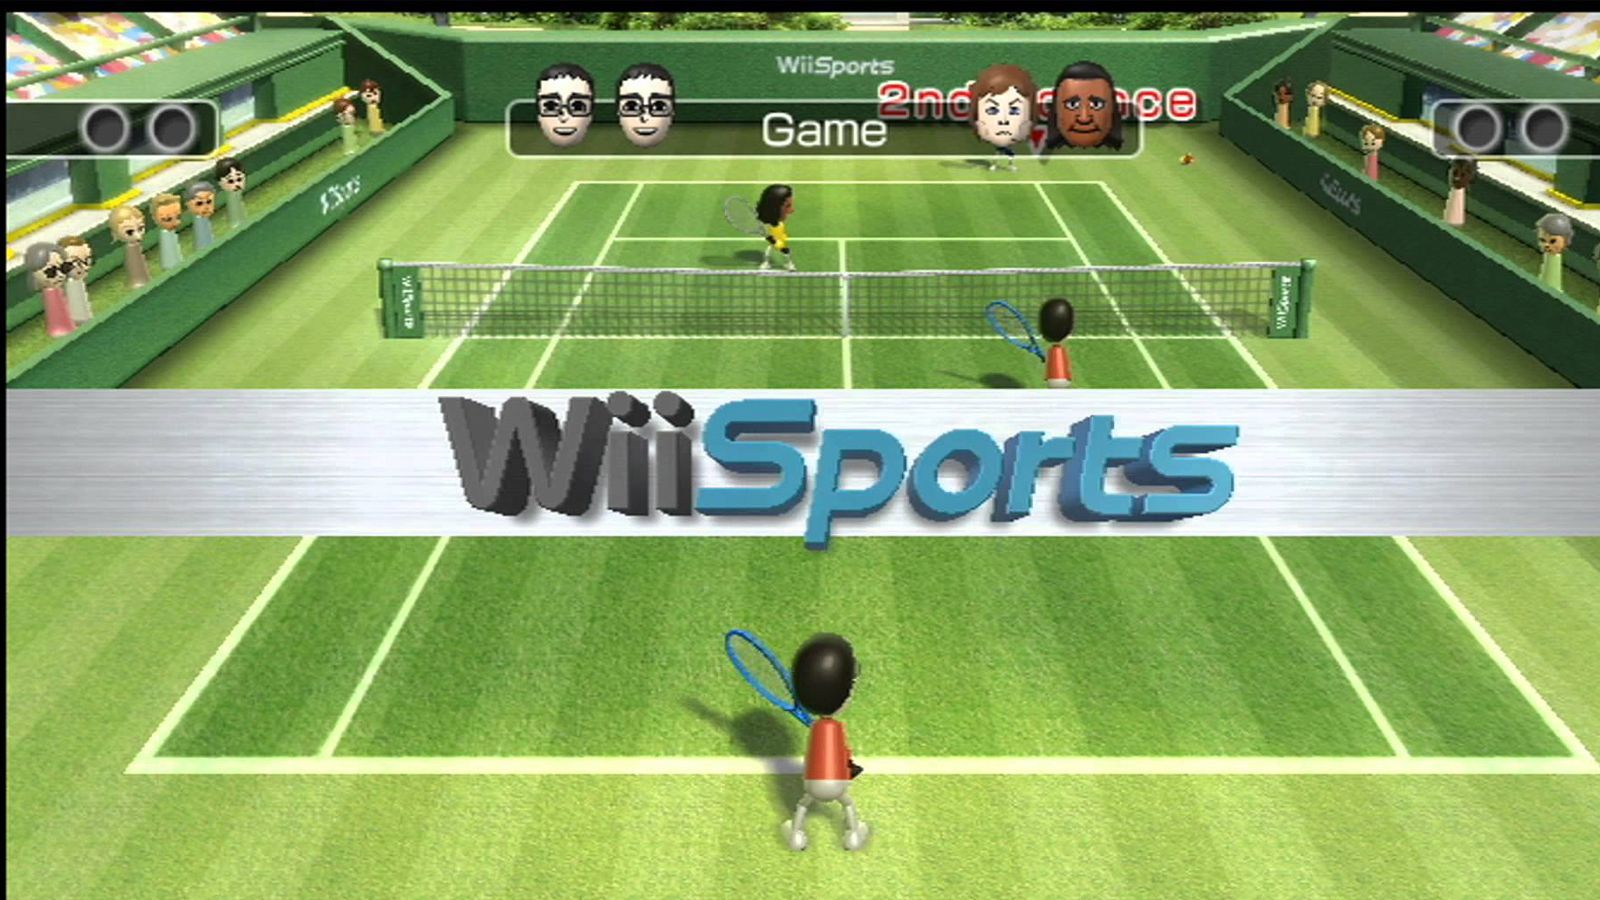 wii sports game